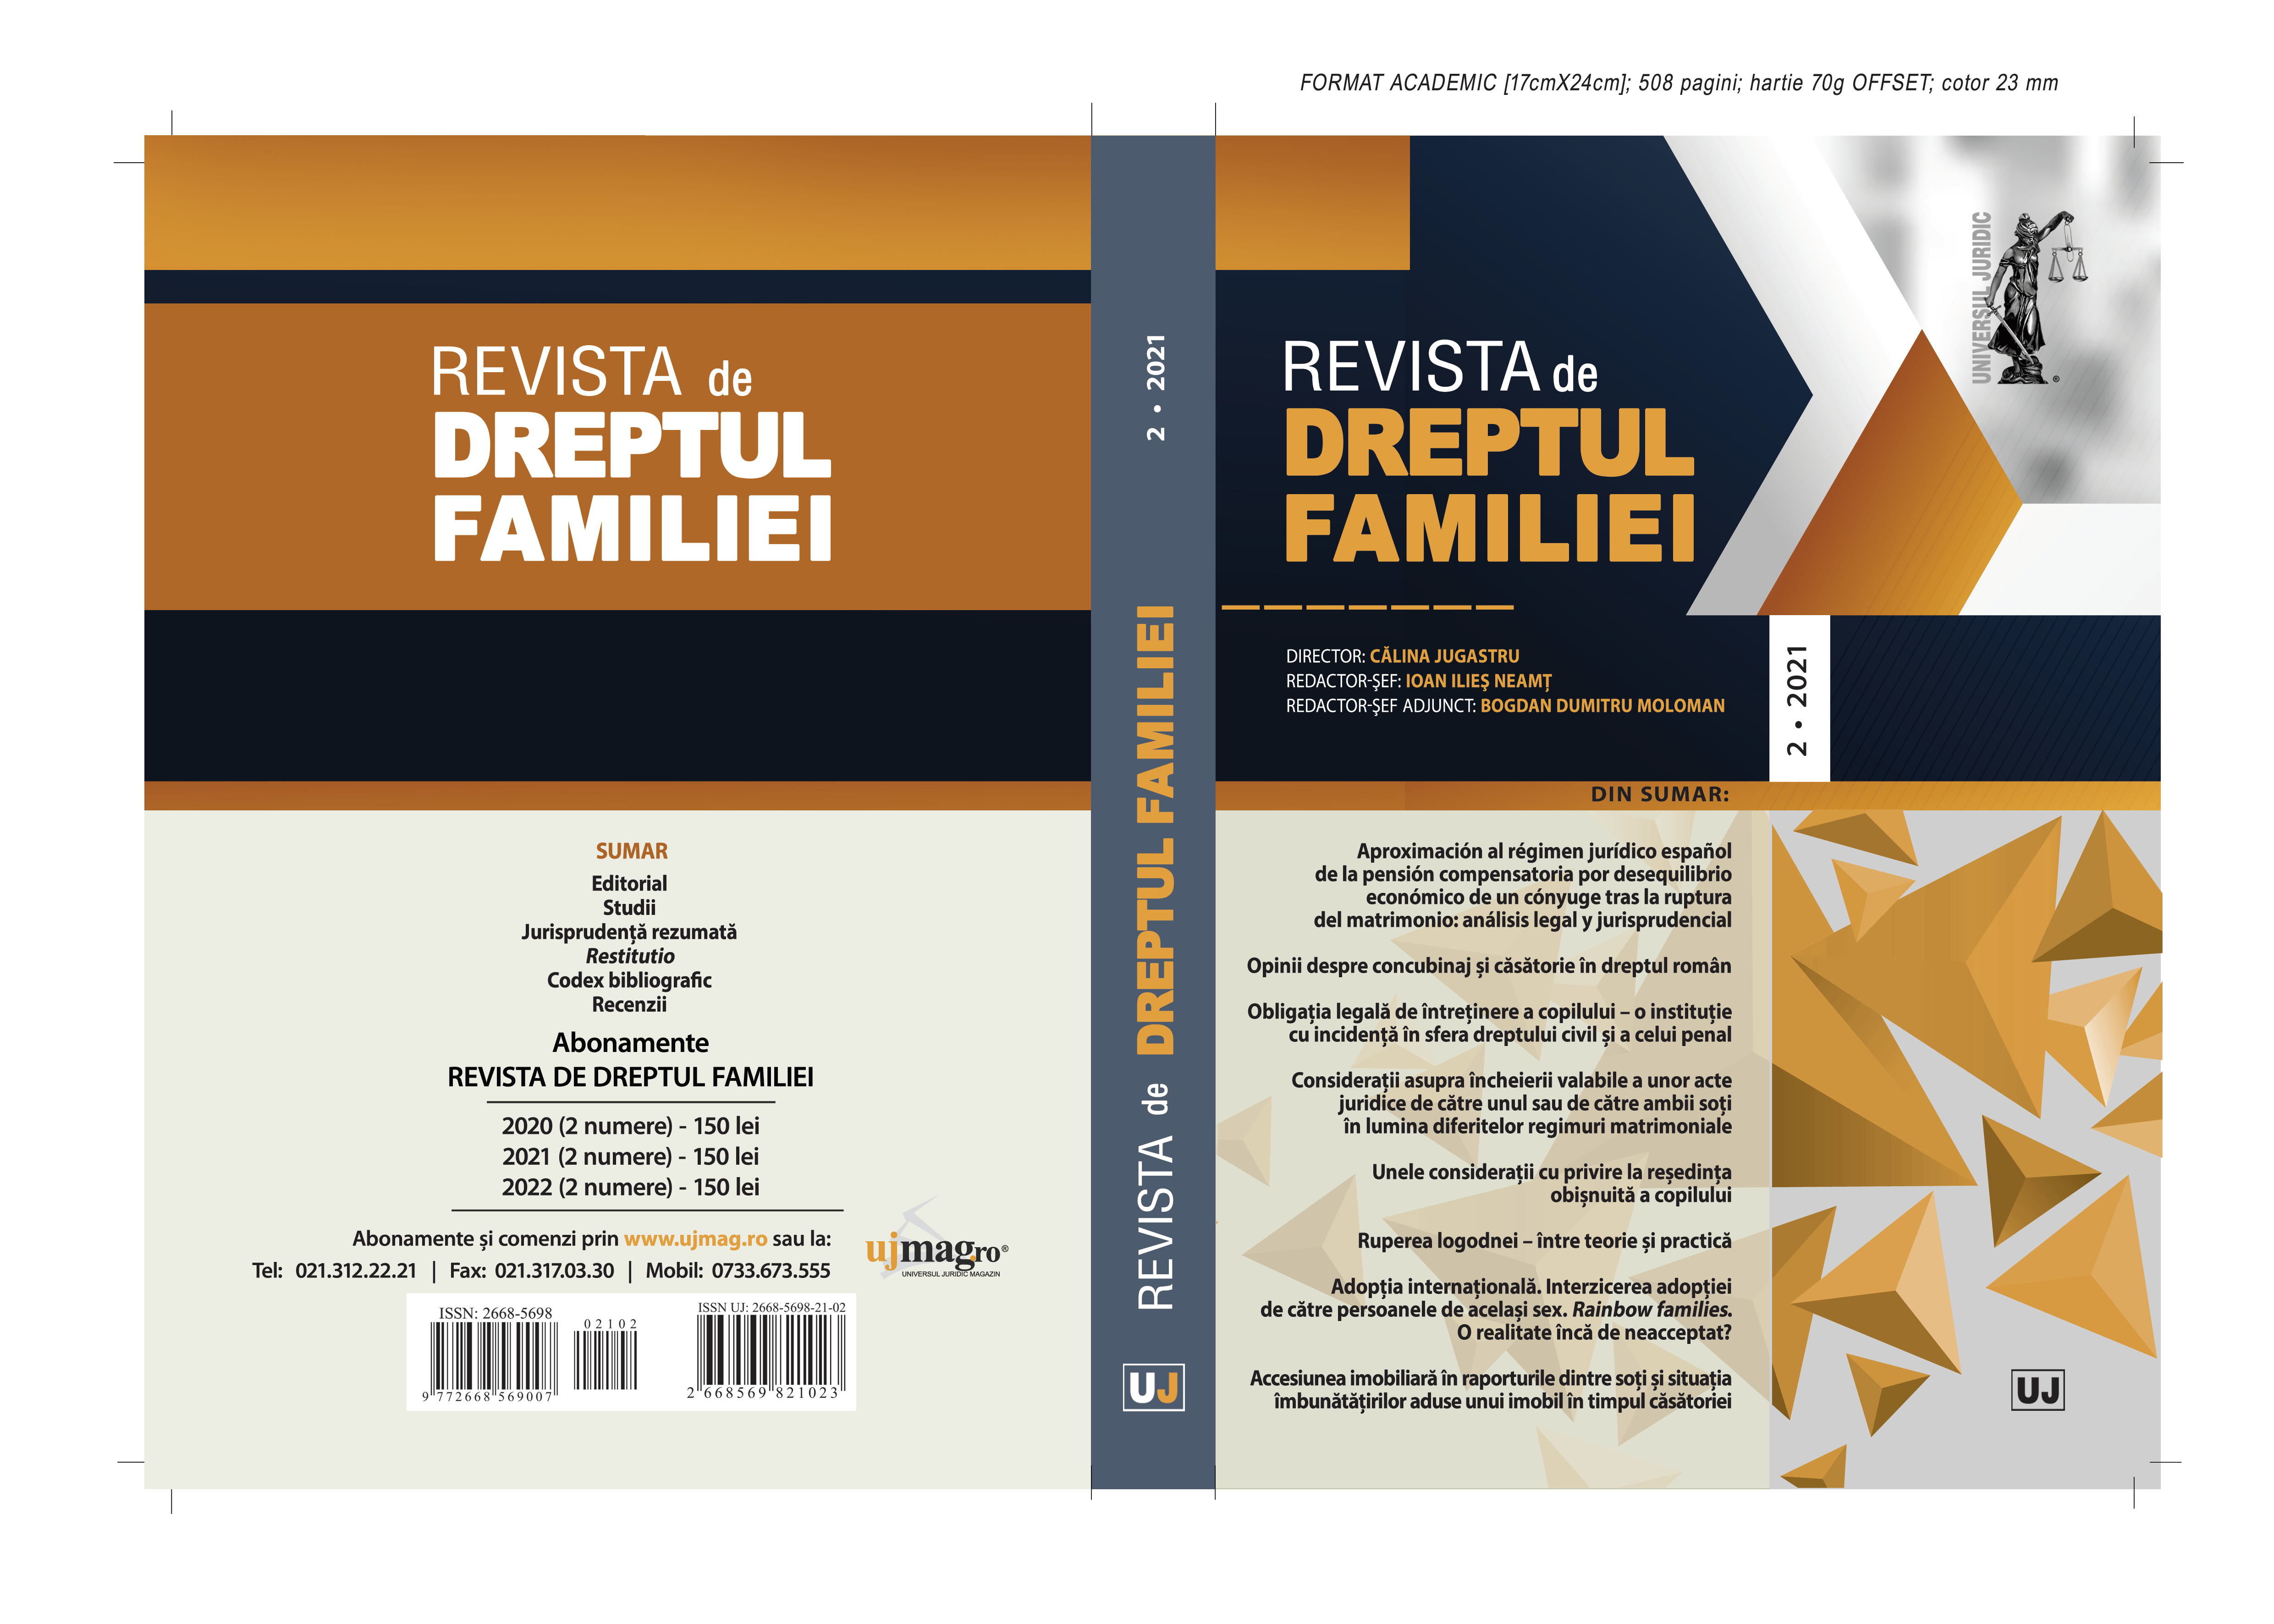 The illicit evidence in family law and conflicts of values Cover Image